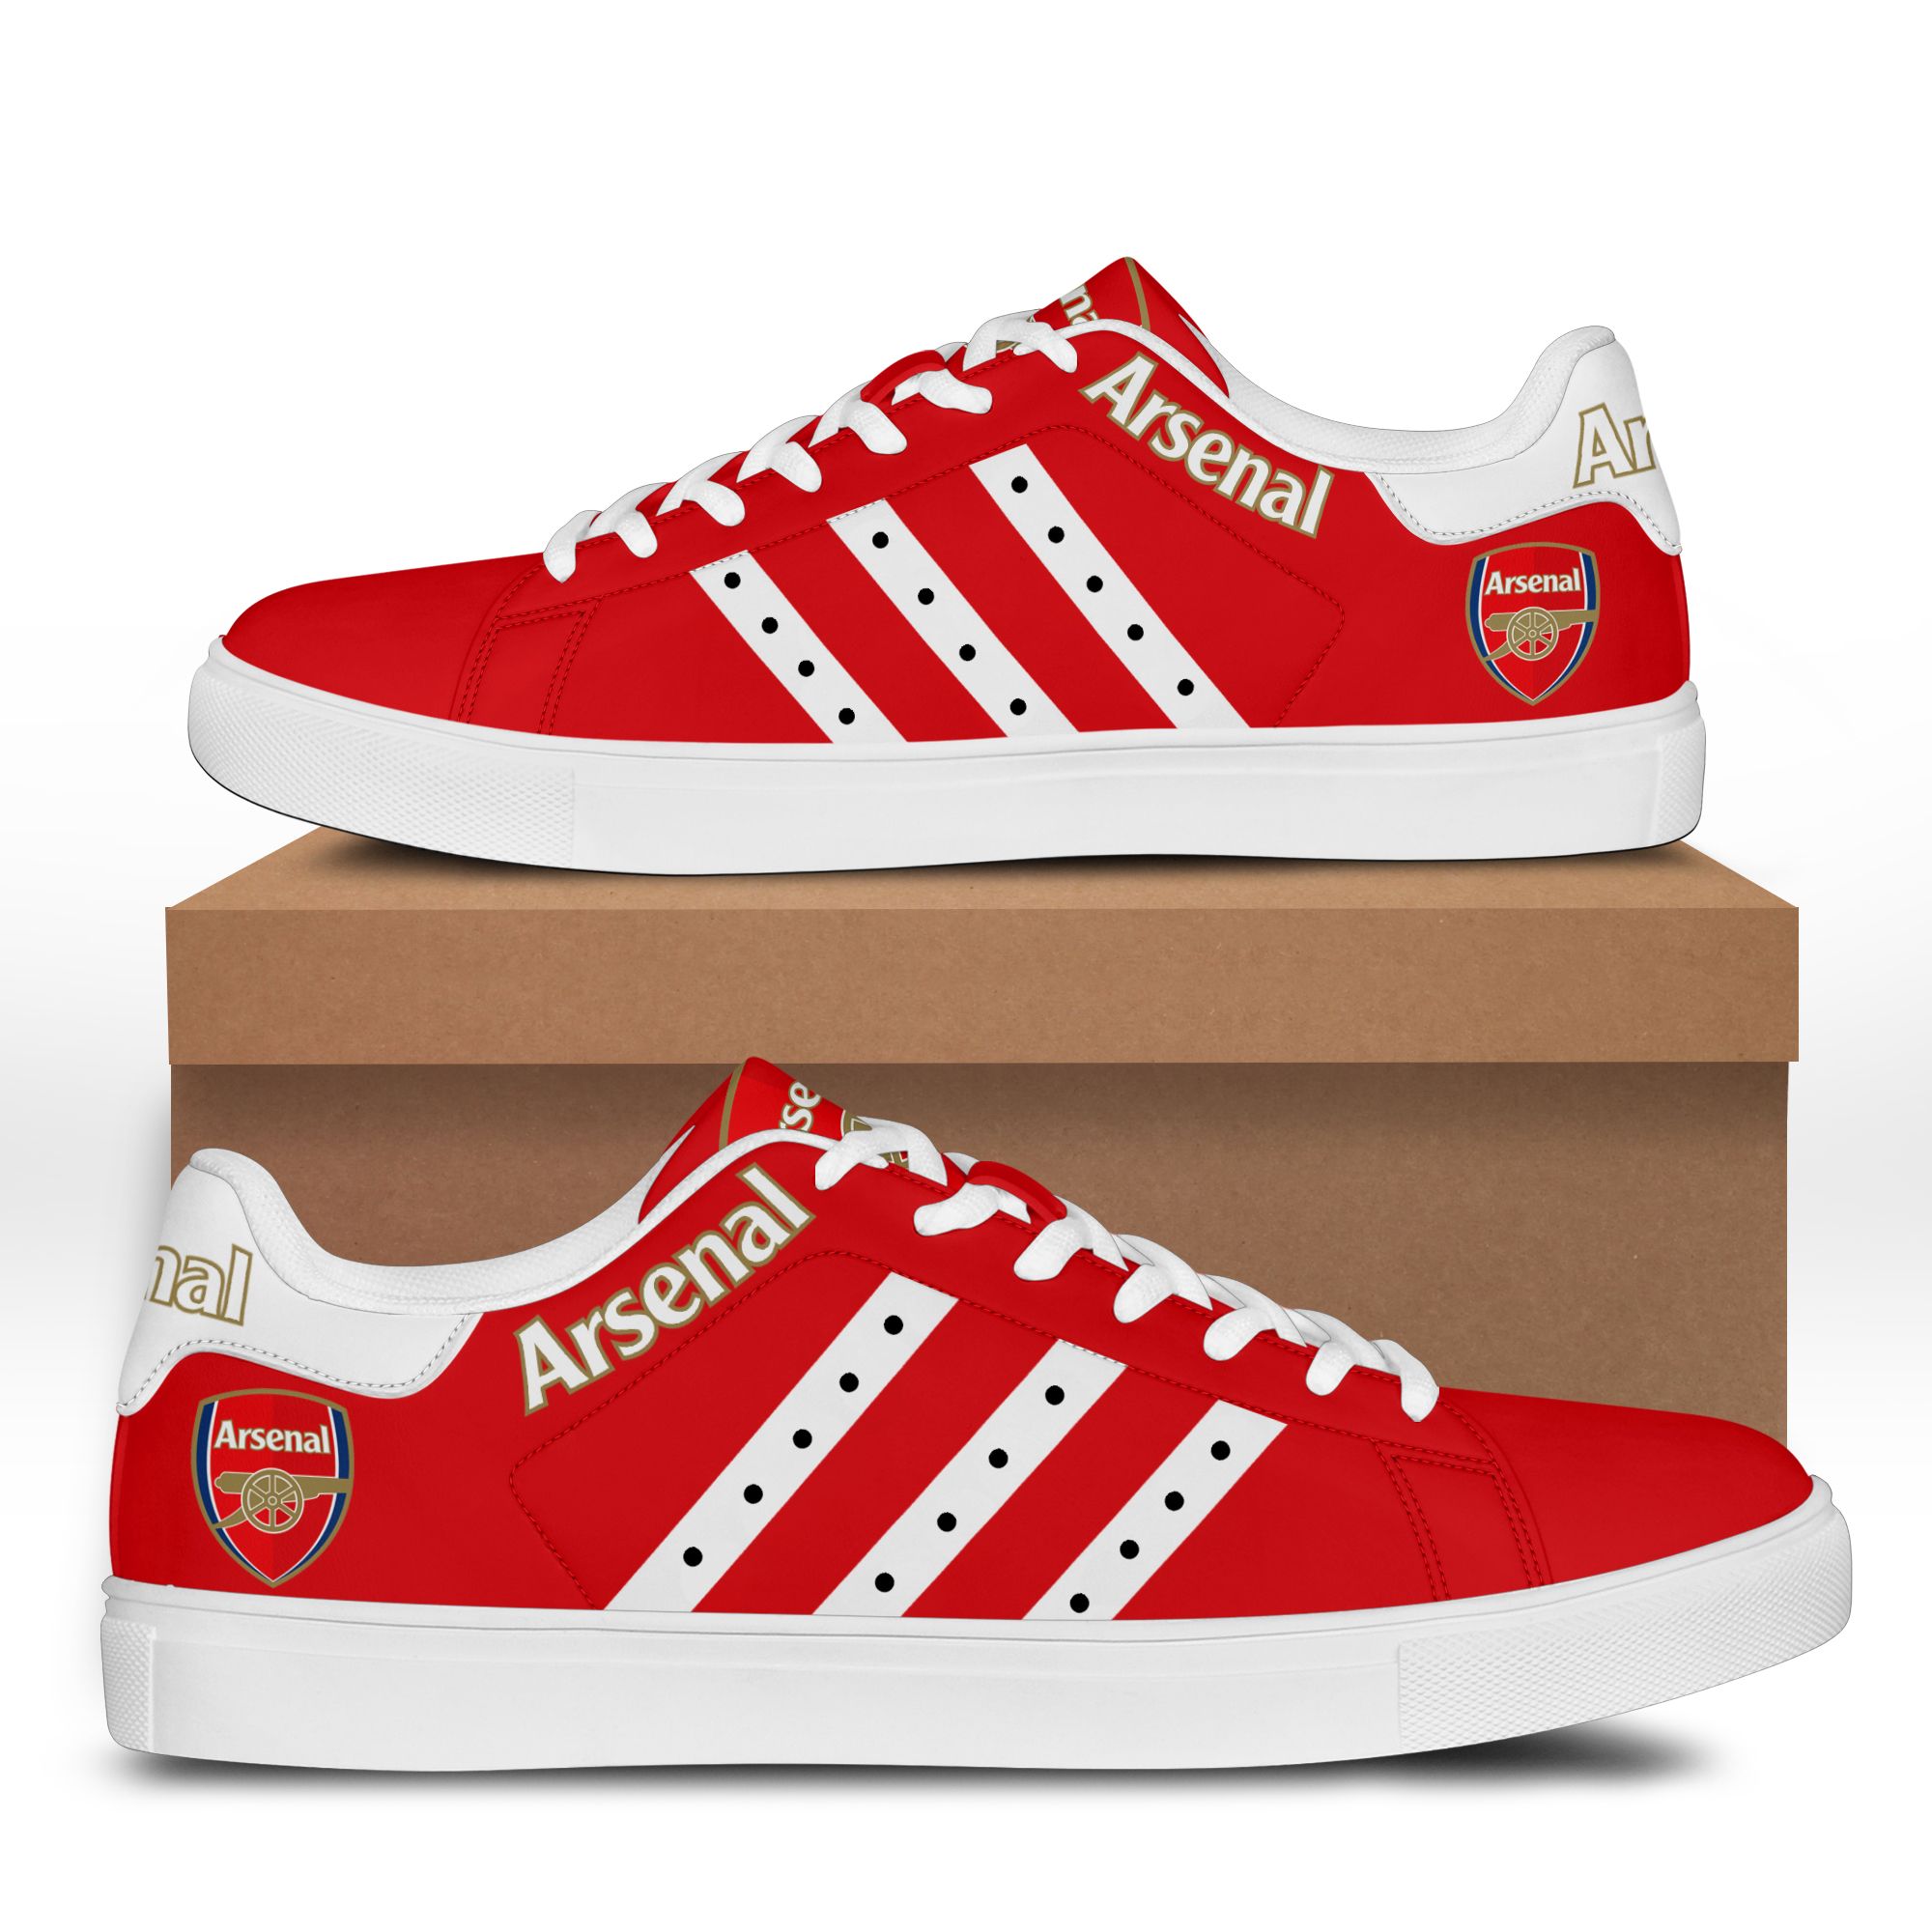 Arsenal stan smith low top shoes 3.3